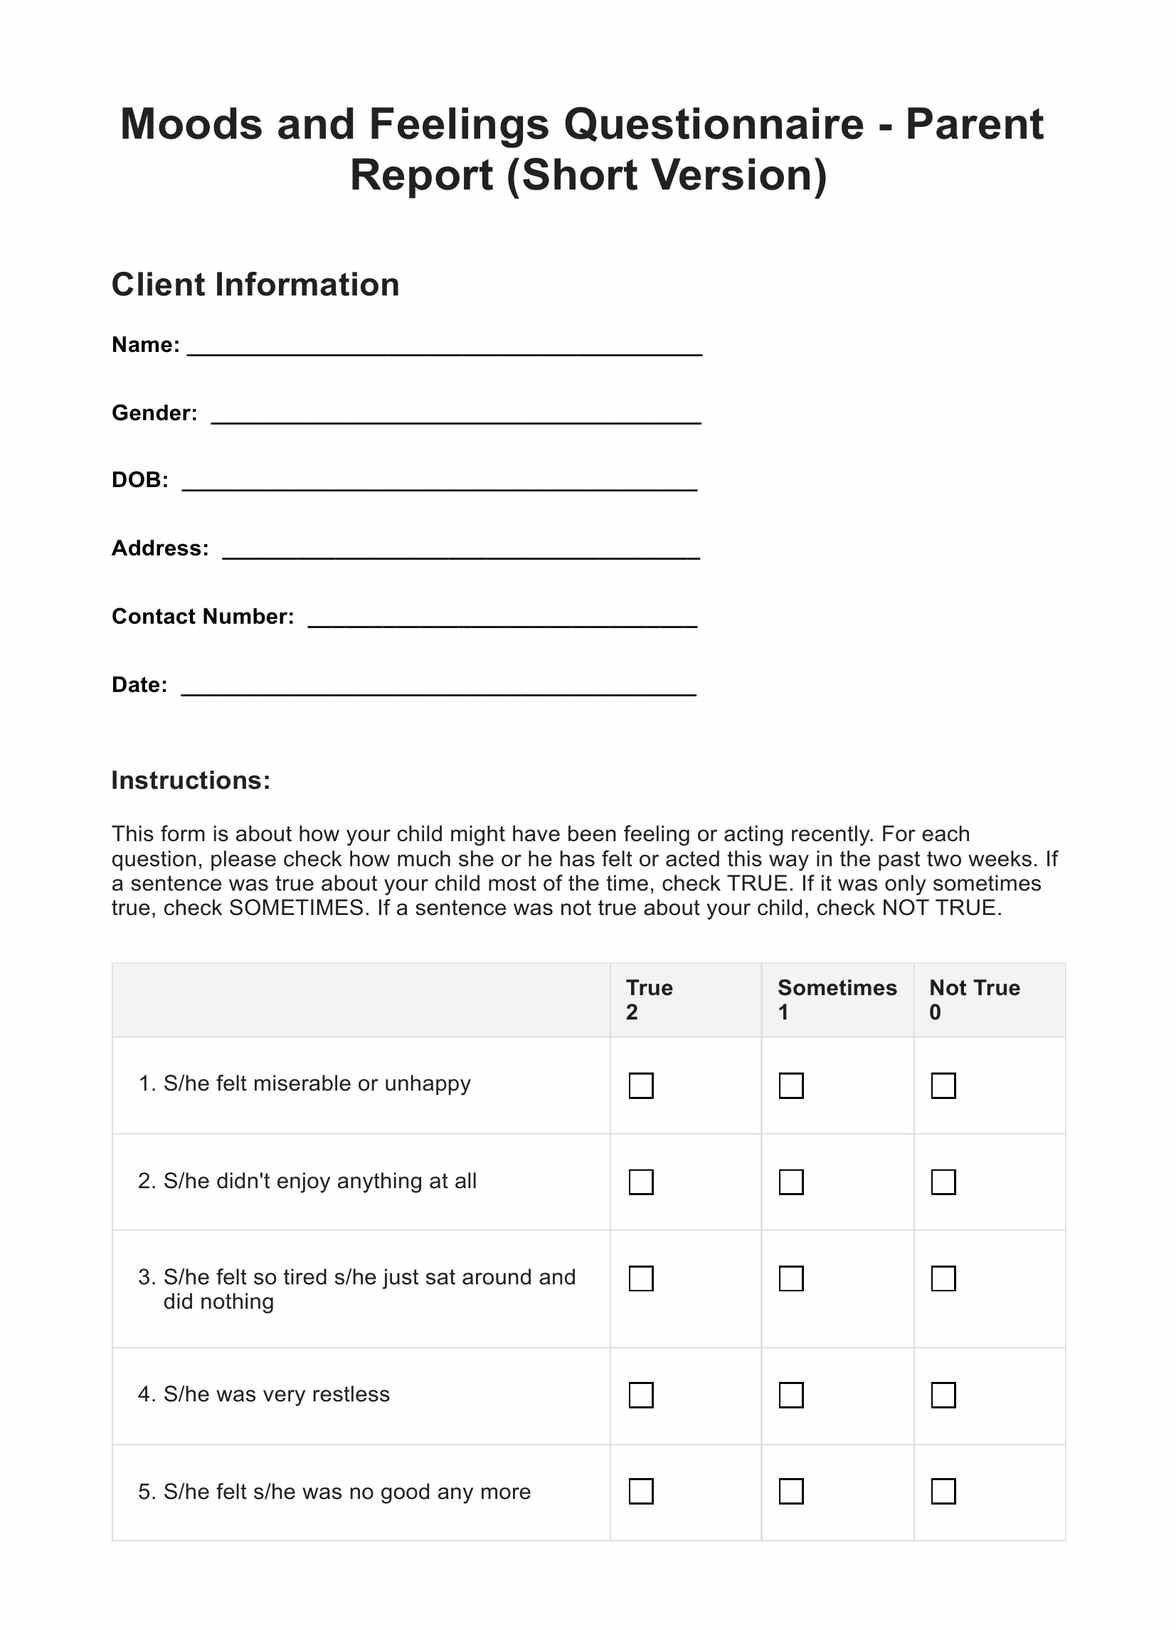 Moods and Feelings Questionnaire - Parent Report (Short Version) PDF Example